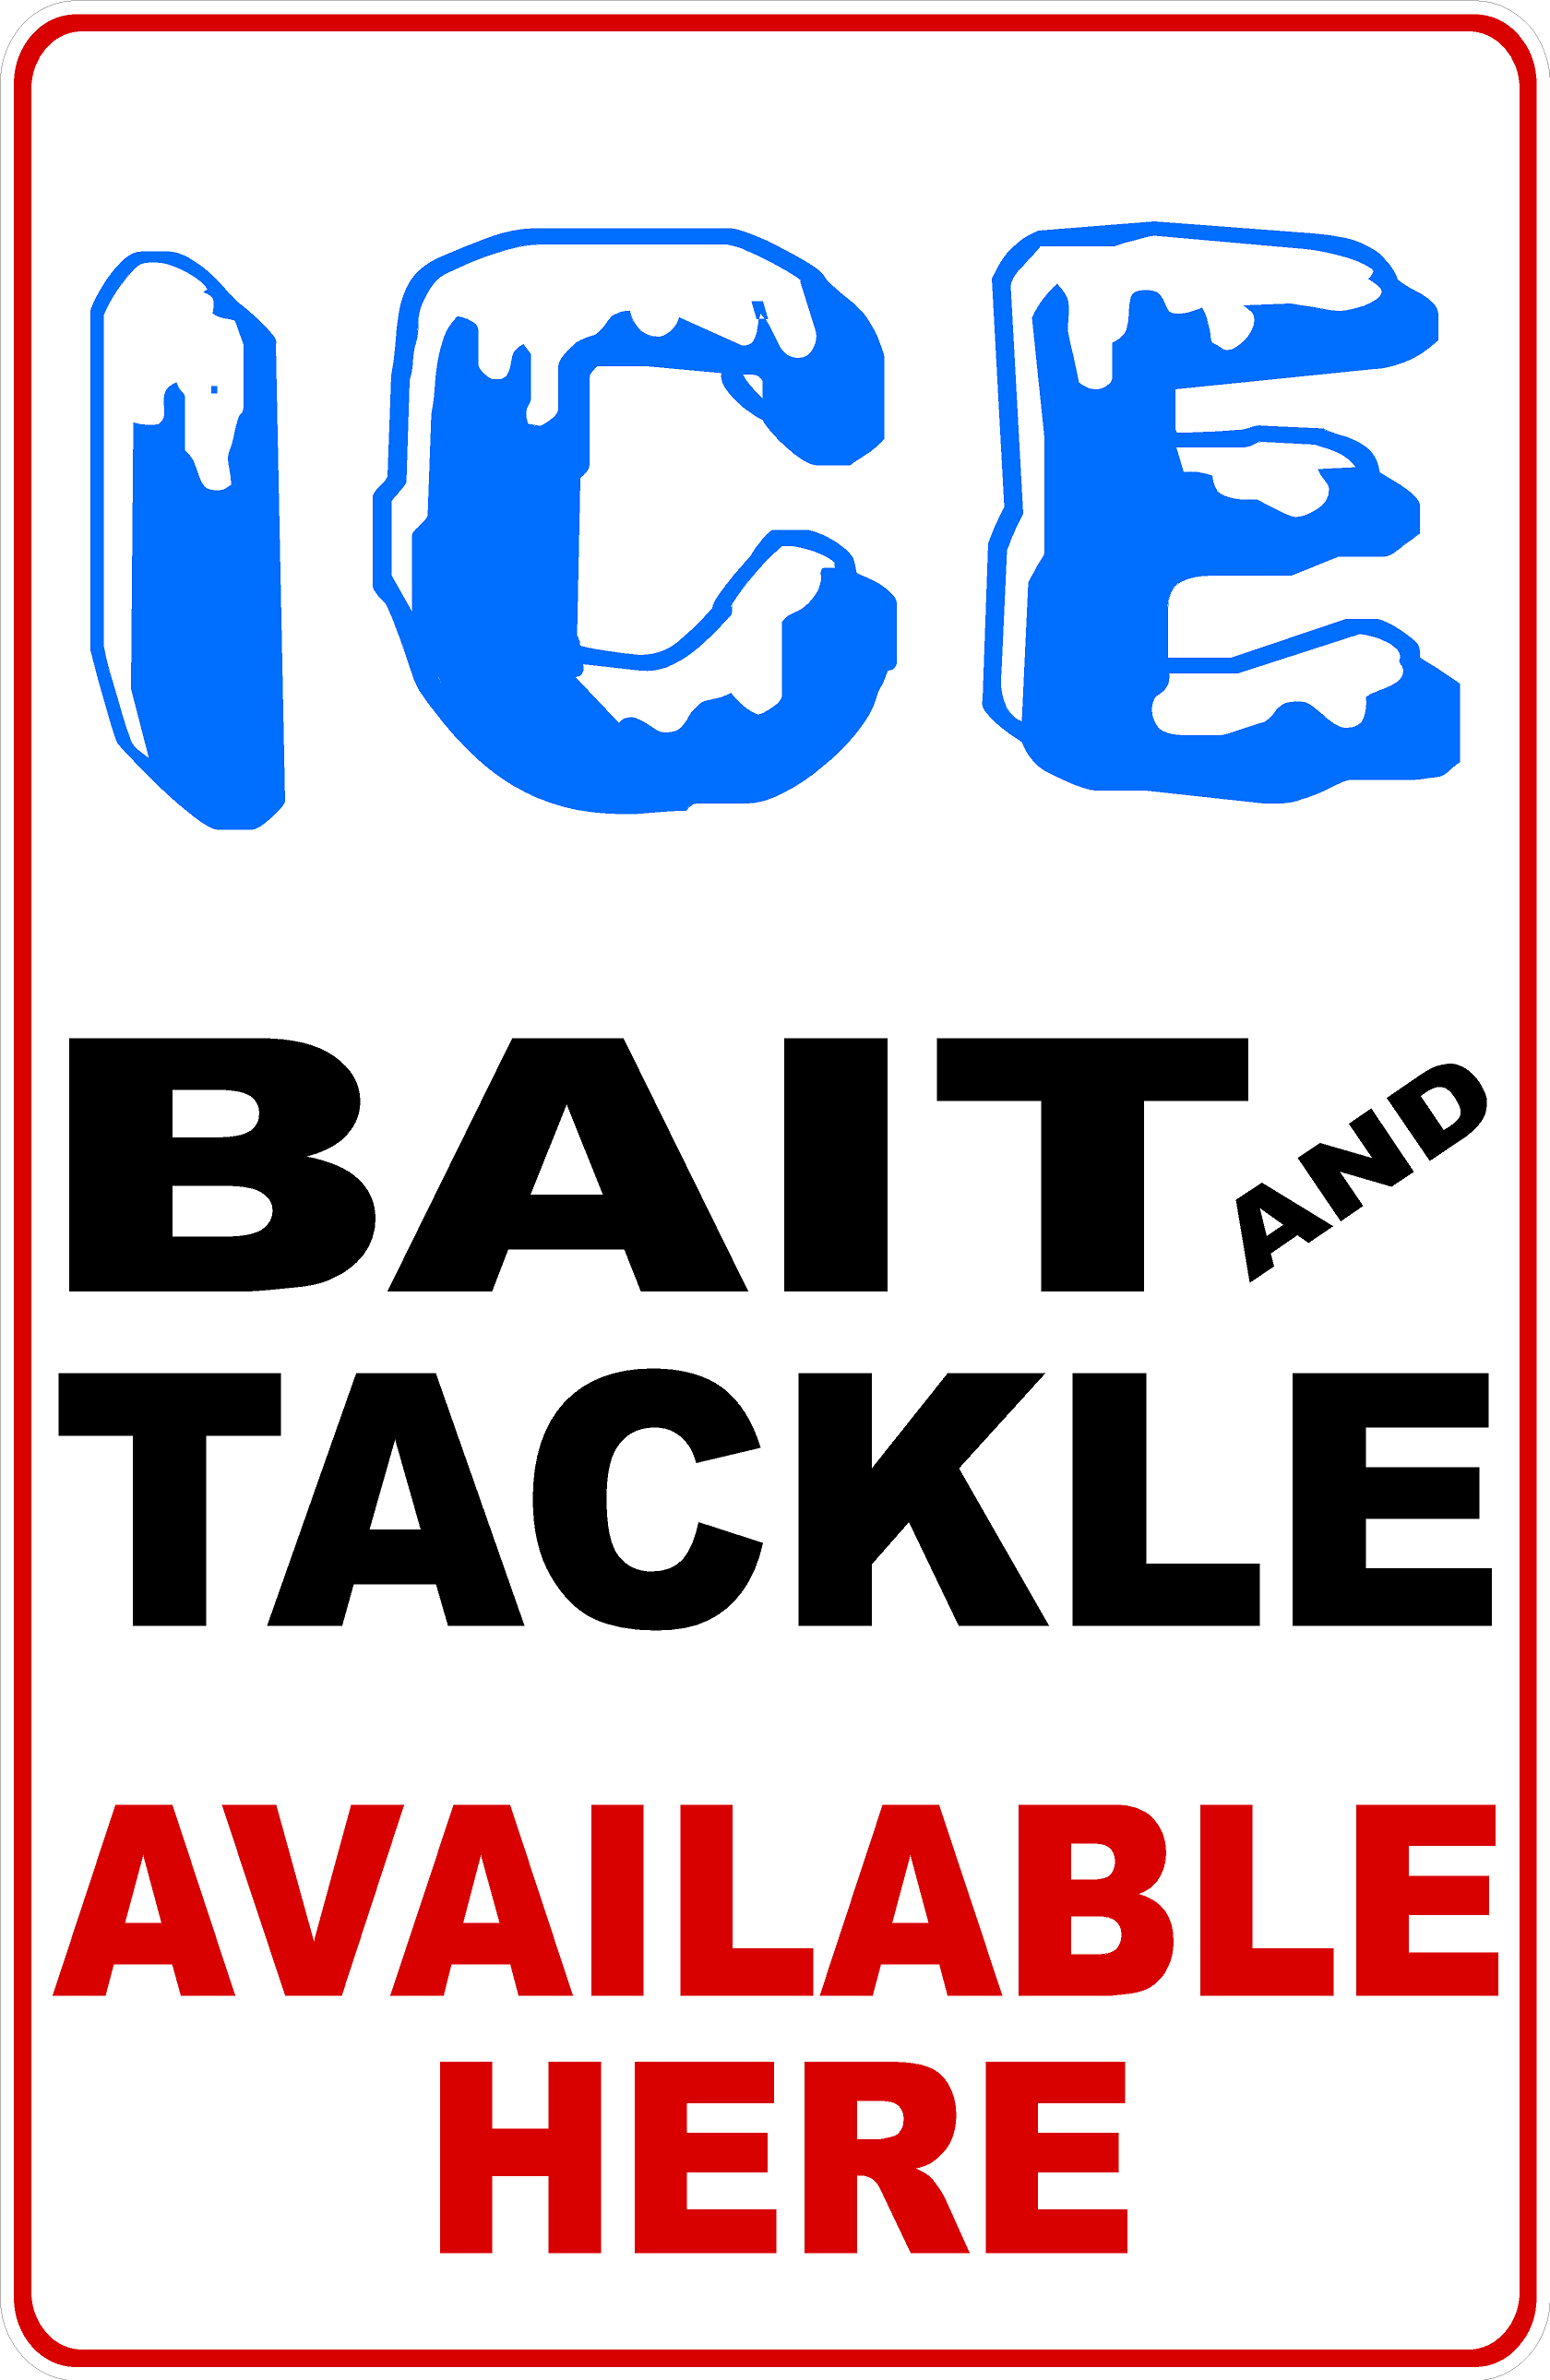 Ice Bait and Tackle Available Here Sign – Signs by SalaGraphics